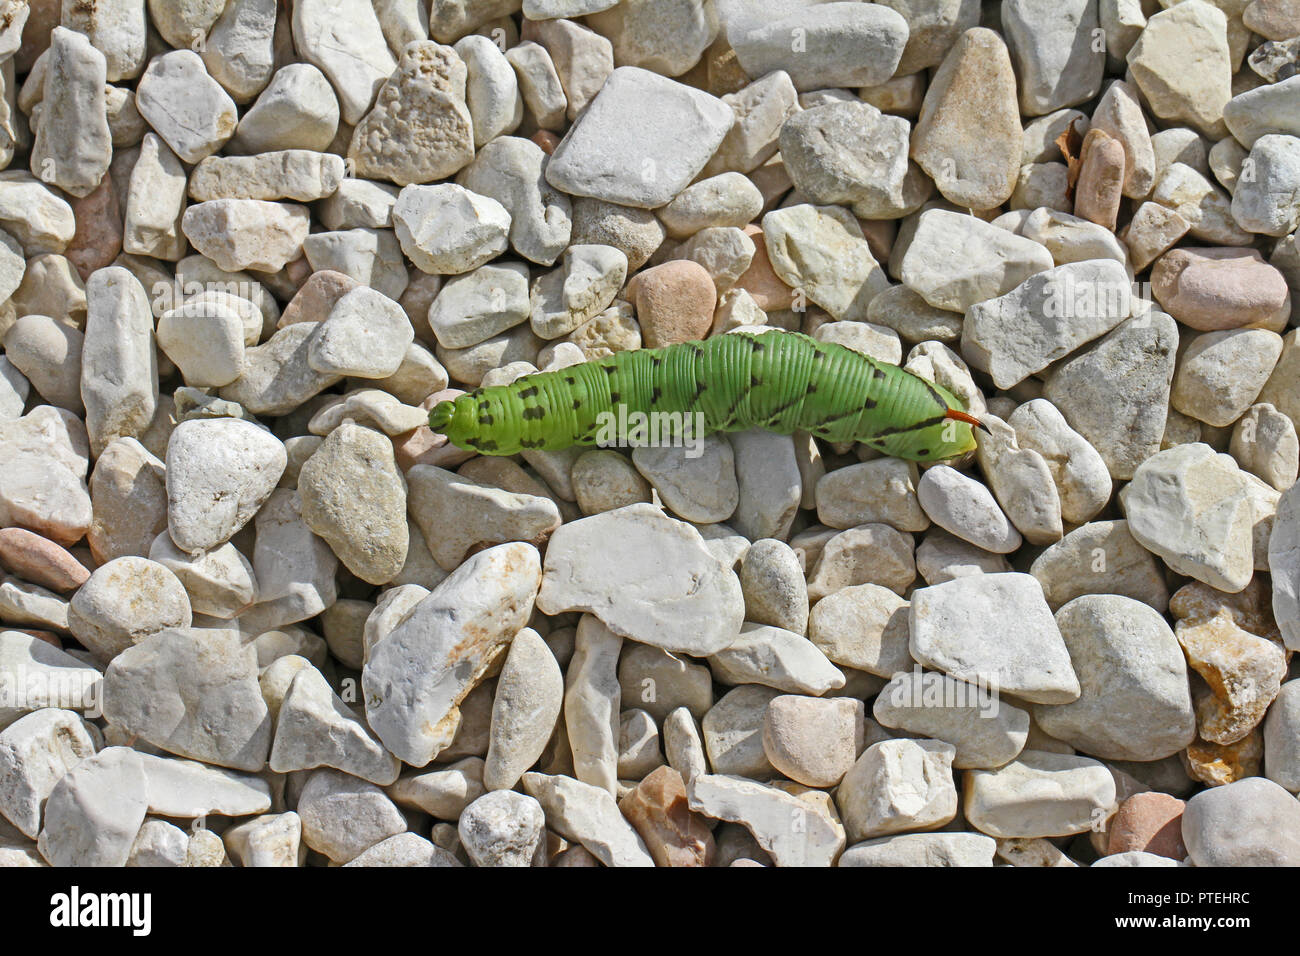 Tomato hornworm or horn worm Latin manduca quinquemaculata  autumn or fall in Italy similar to a tobacco hornworm Latin manduca sexta Stock Photo